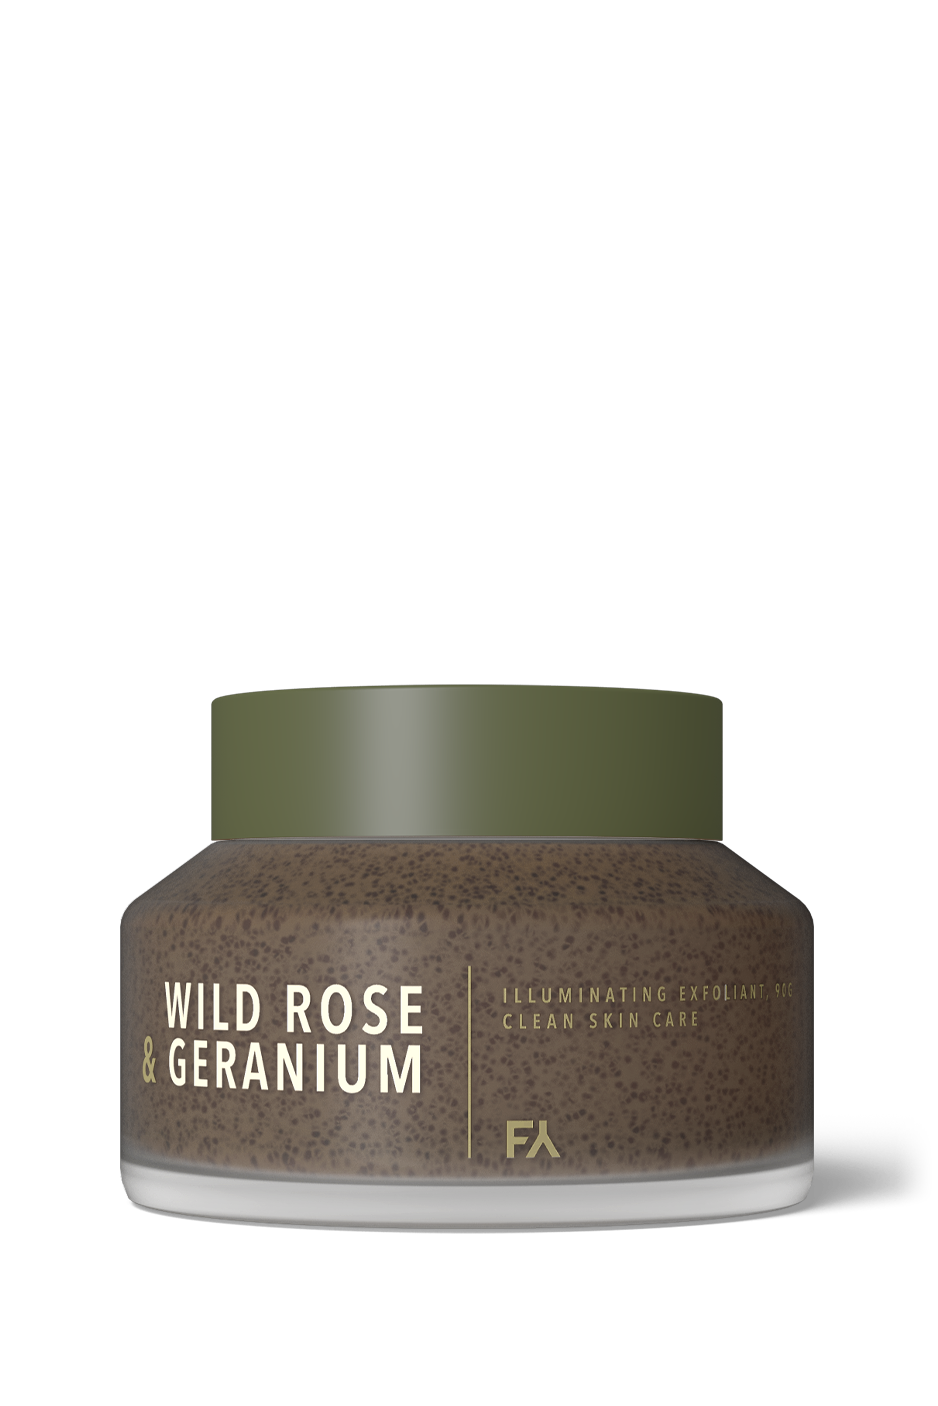 Product picture of the Wild Rose & Geranium Illuminating Exfoliant by Fields of Yarrow on a transparent background